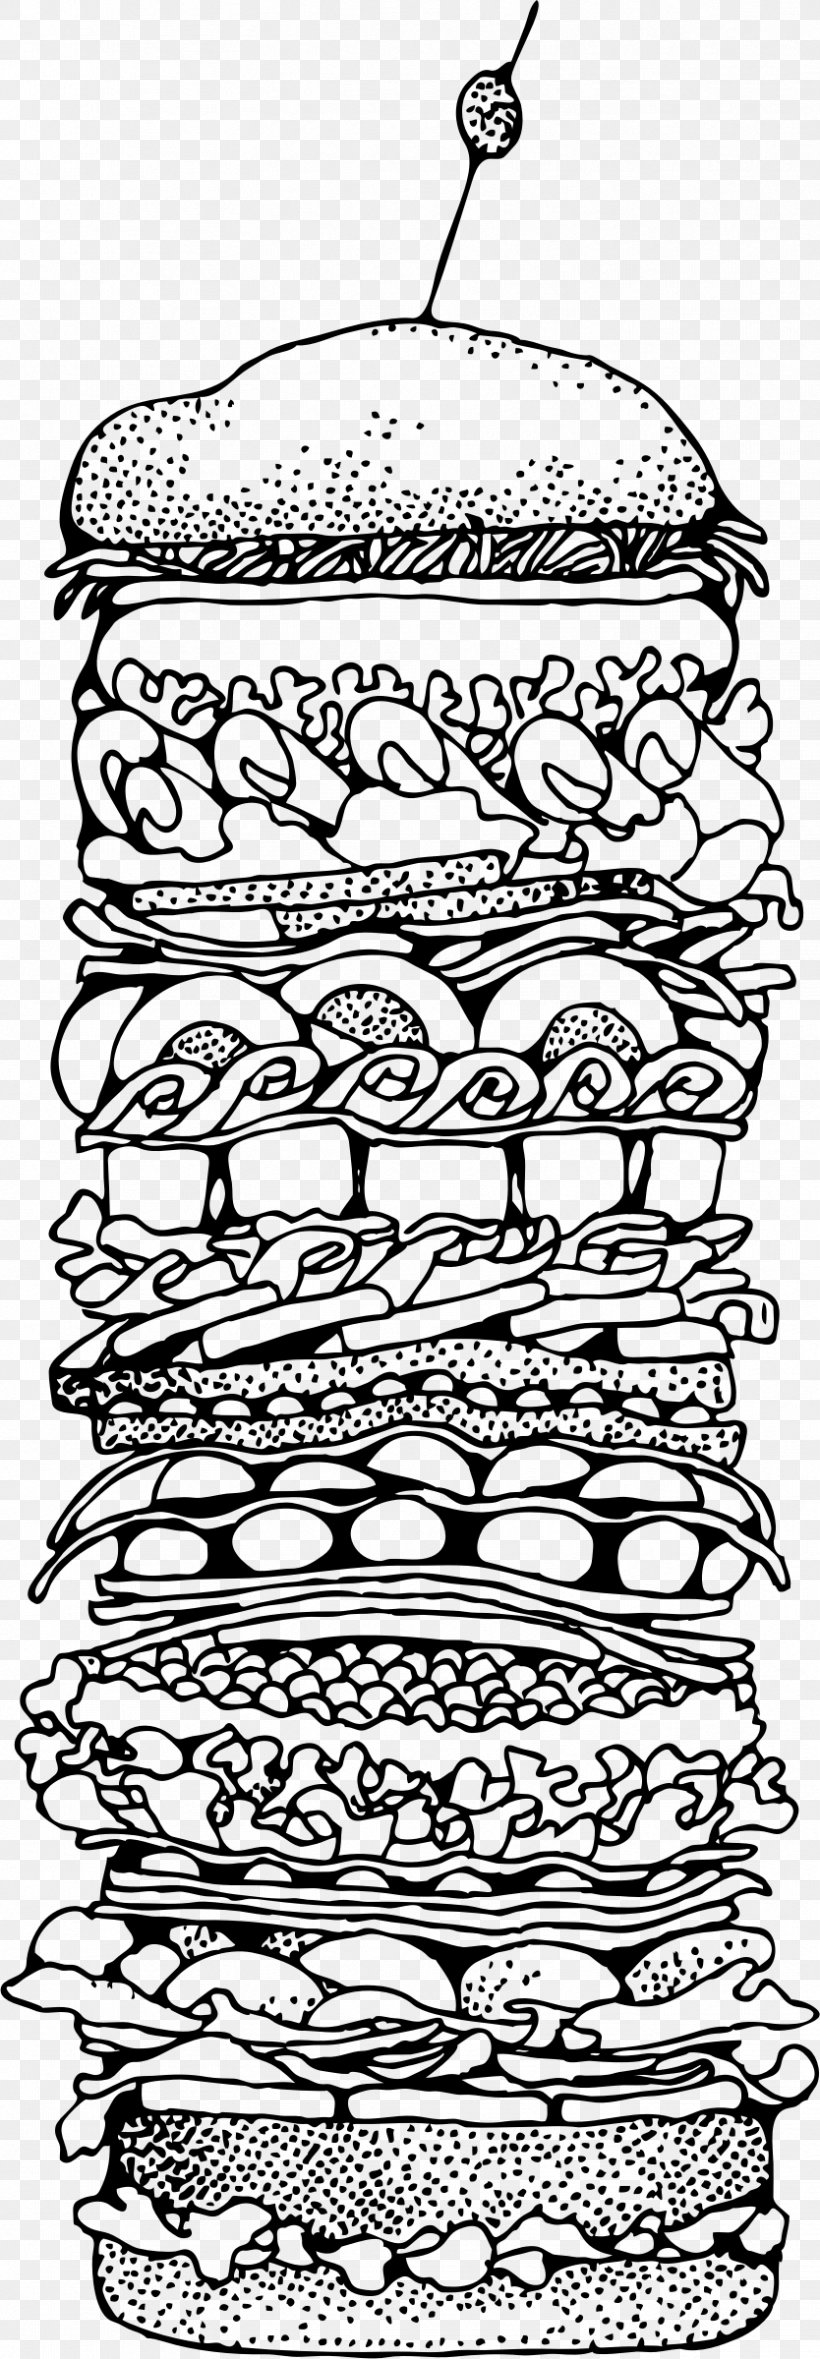 Peanut Butter And Jelly Sandwich Submarine Sandwich Hamburger Fast Food Tuna Salad, PNG, 834x2400px, Peanut Butter And Jelly Sandwich, Area, Black, Black And White, Cheese Sandwich Download Free